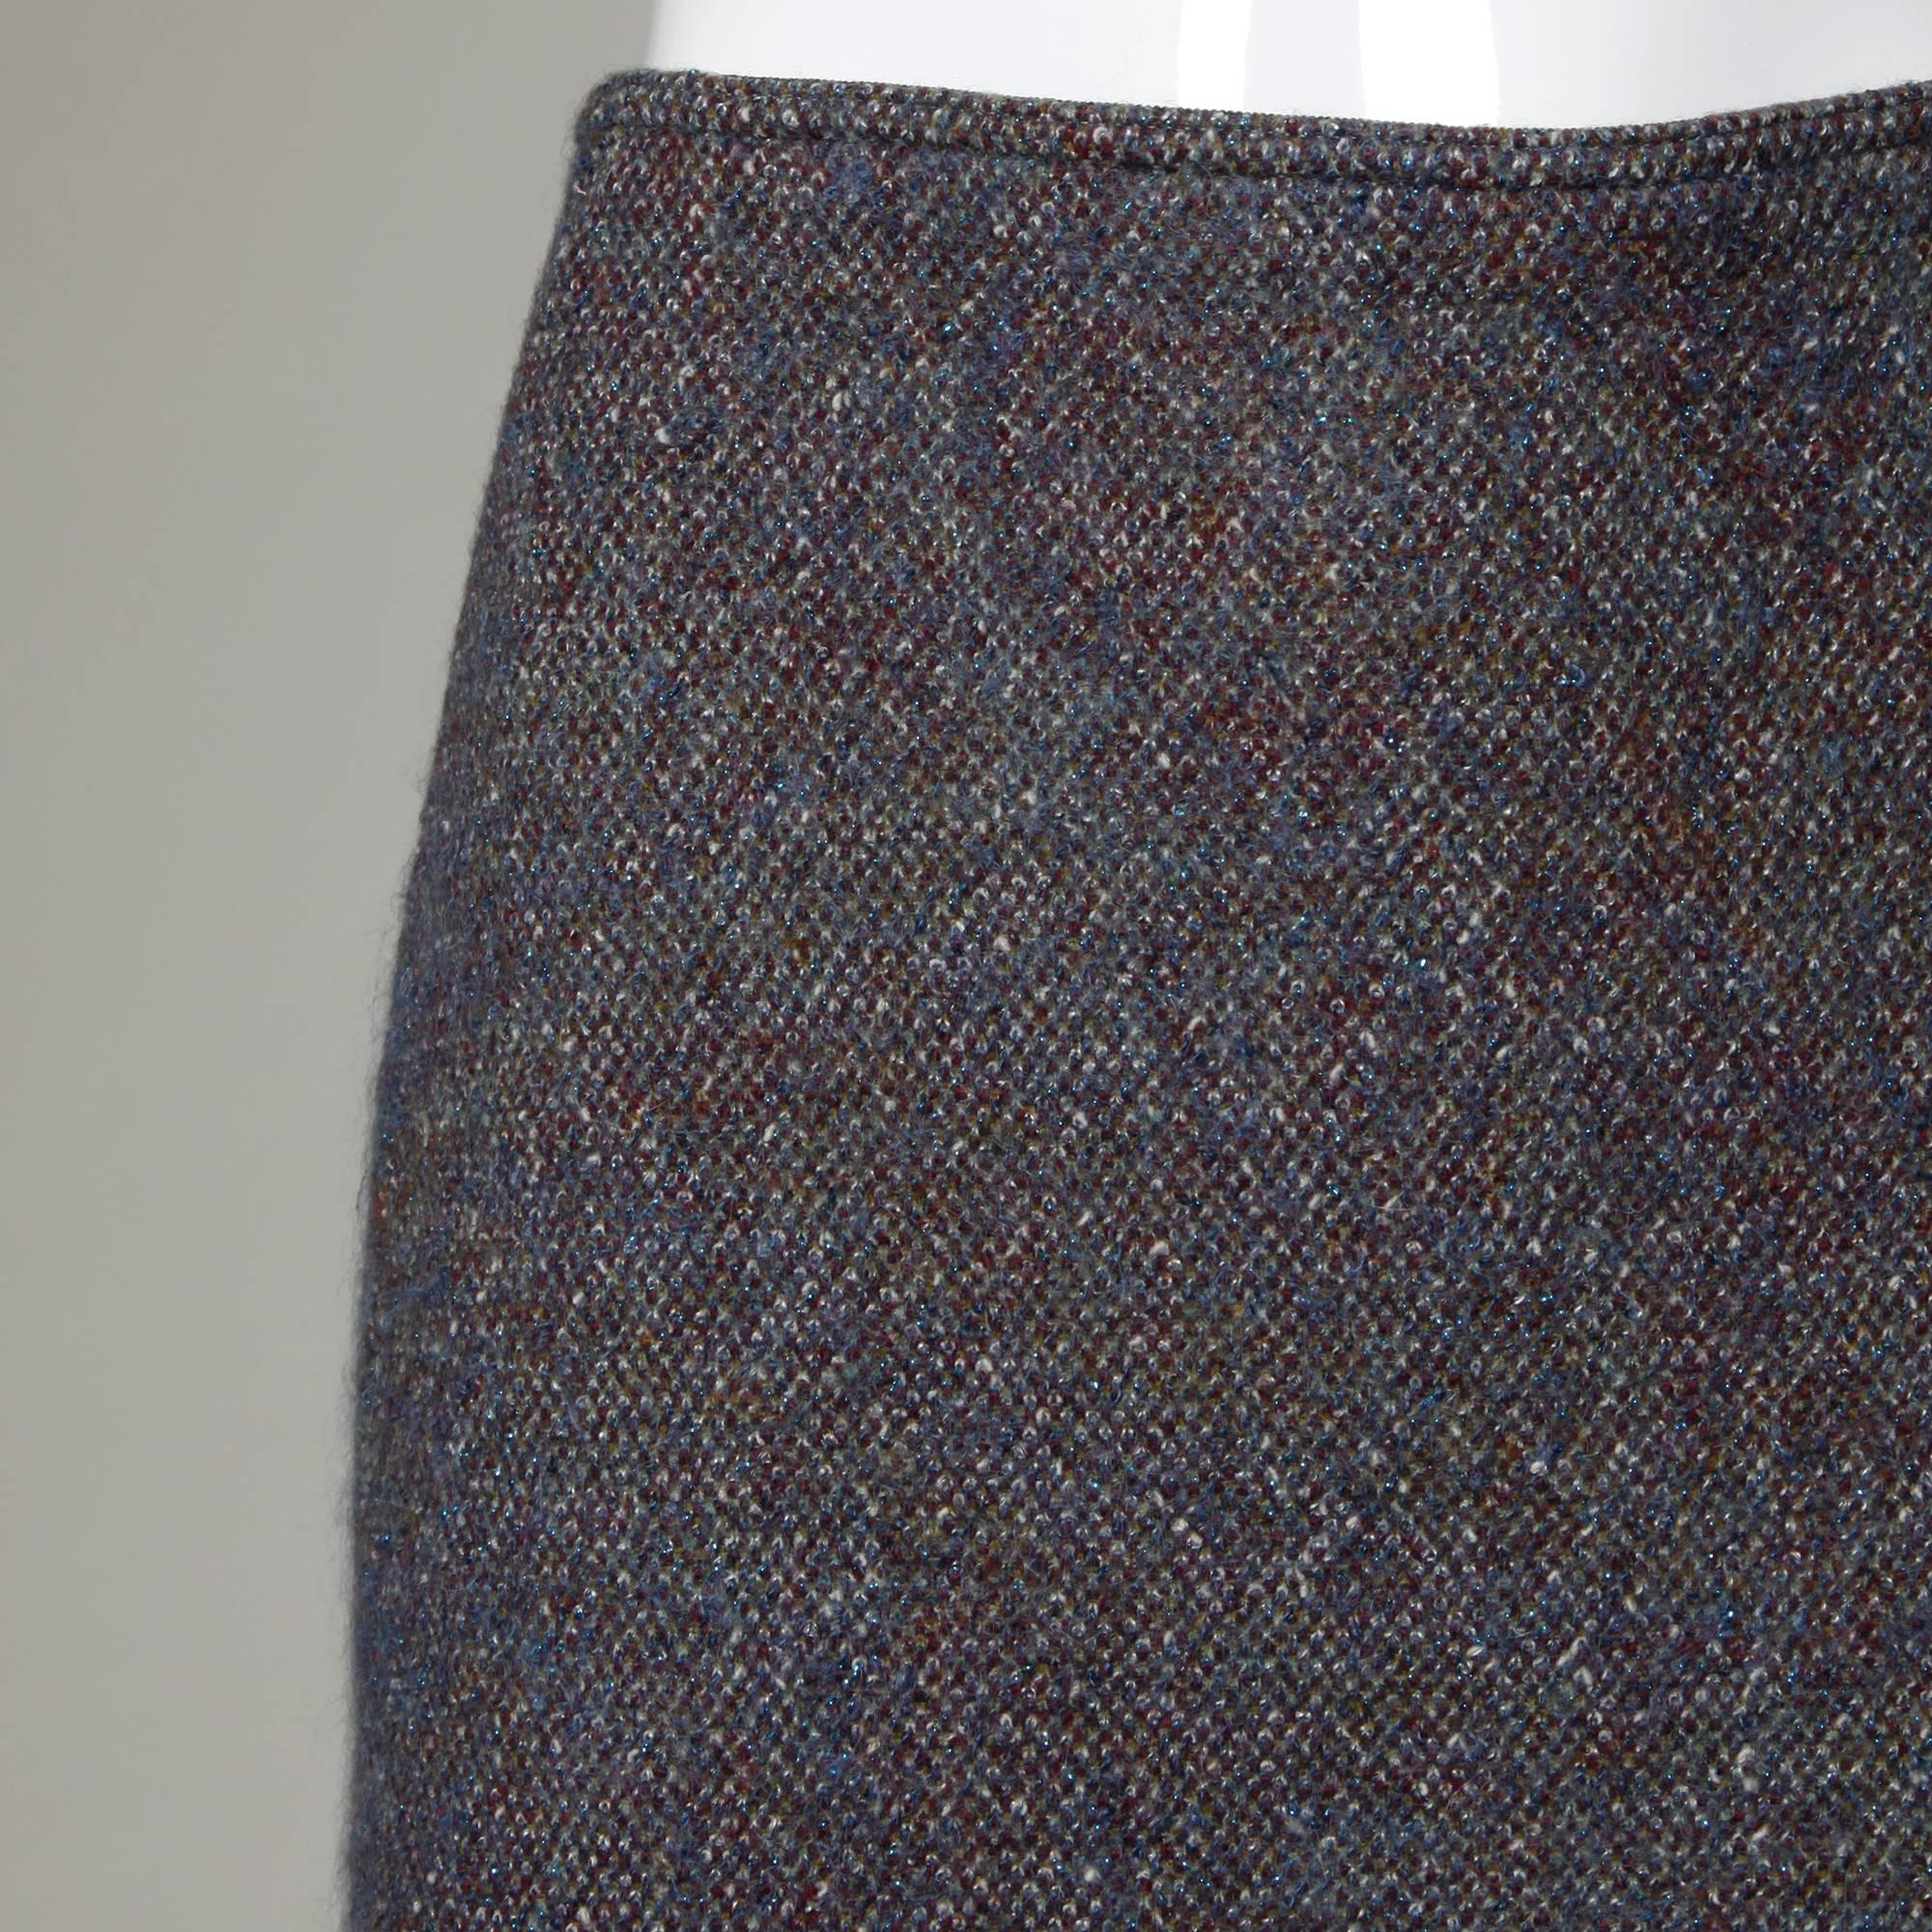 Extremely soft wool blend Missoni for Neiman Marcus pencil skirt. 

Details:

Fully Lined
No Closure: Fabric Contains Stretch
Marked Size: 46
Estimated Size: Large
Color: Metallic Blue/ Purple/ Multicolored
Fabric: Not Marked/ Very Soft